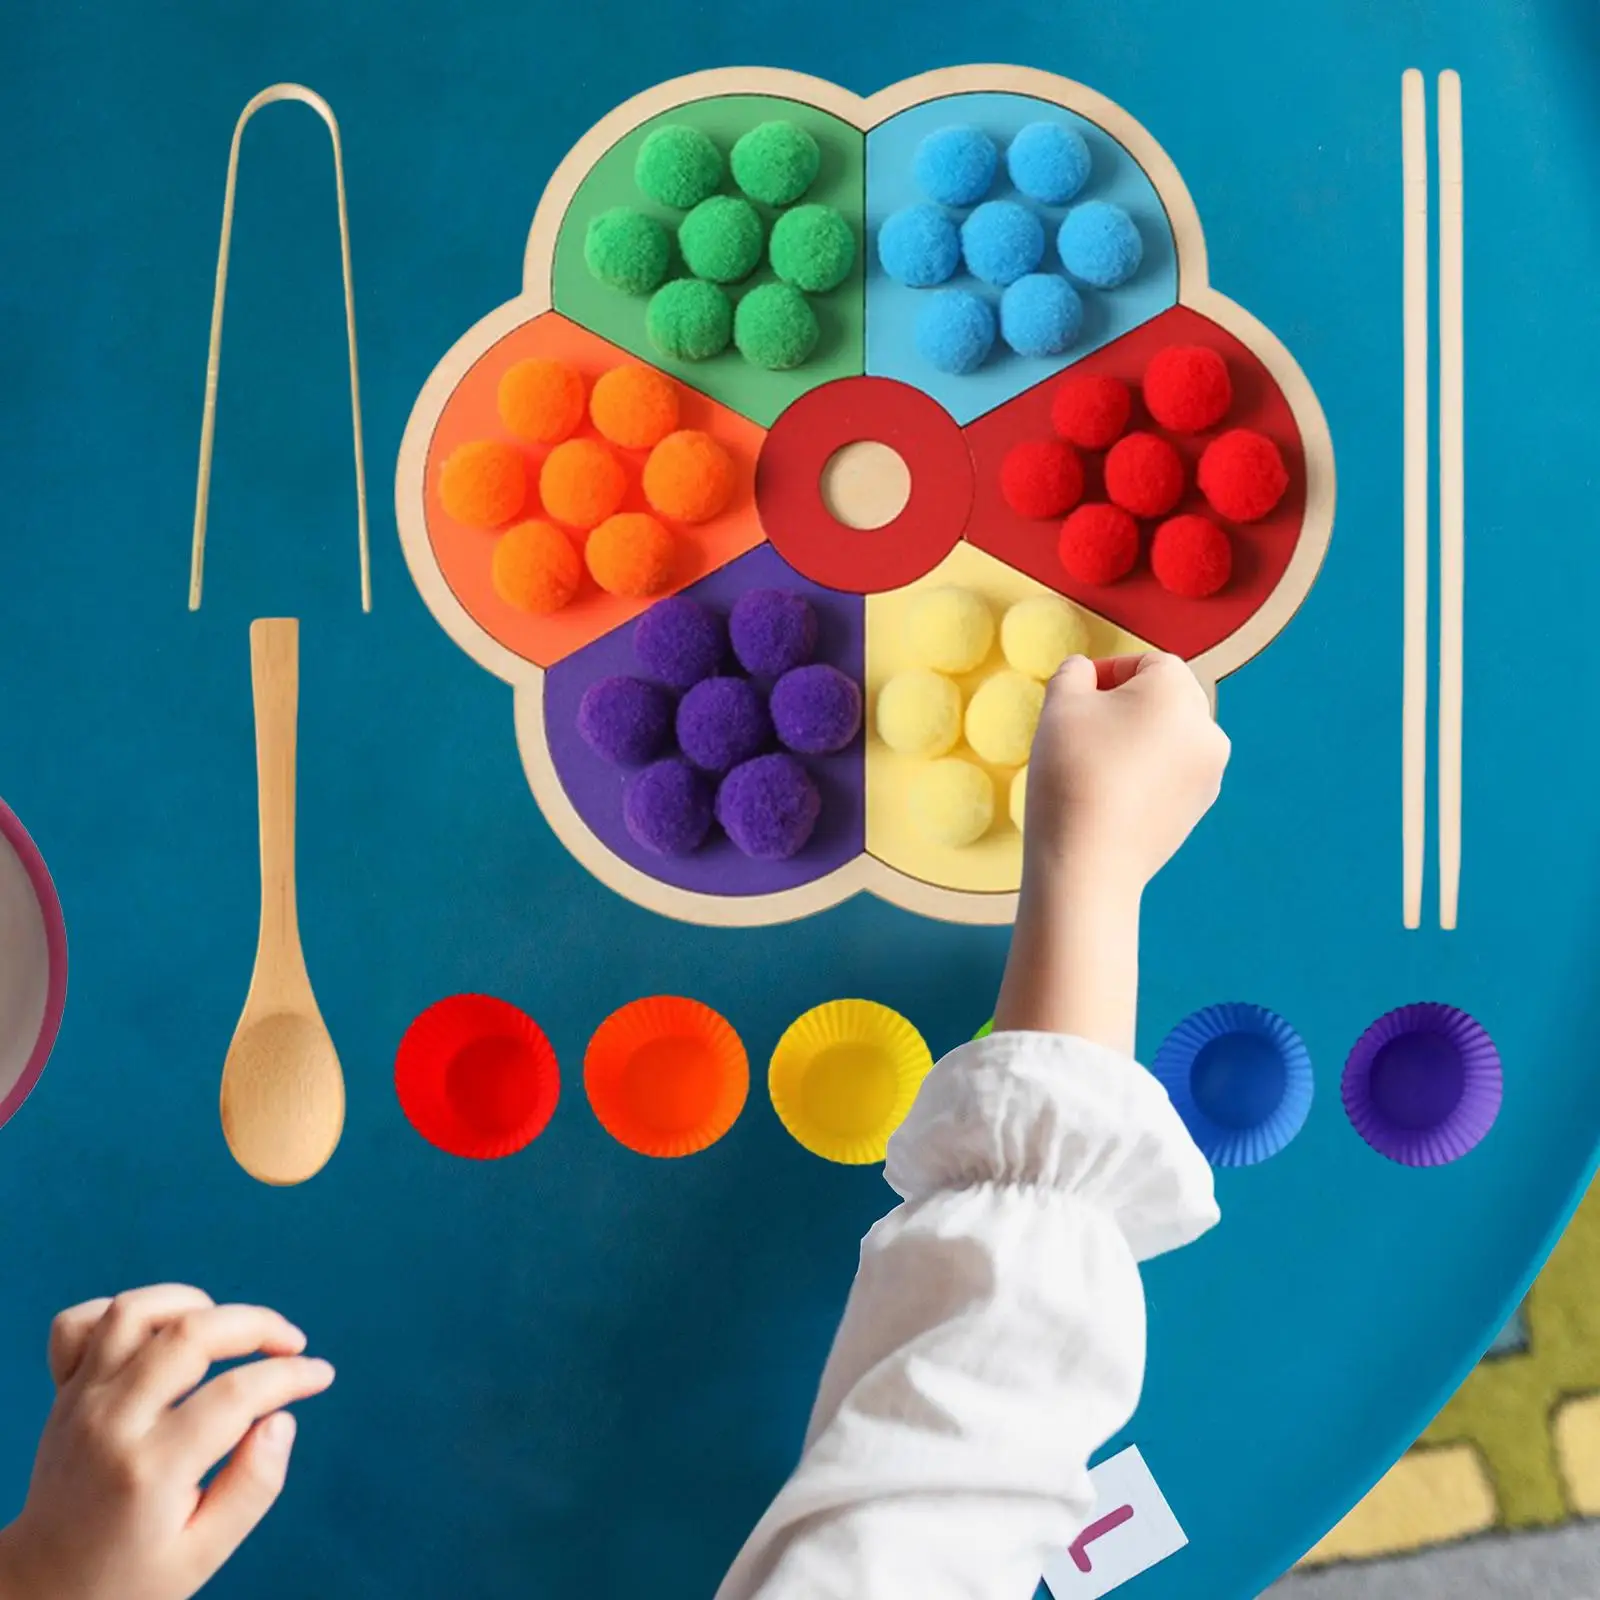 Wooden Montessori Rainbow Peg Board Color Sorting and Counting Preschool Learning Toys for Children Logical Thinking Matching